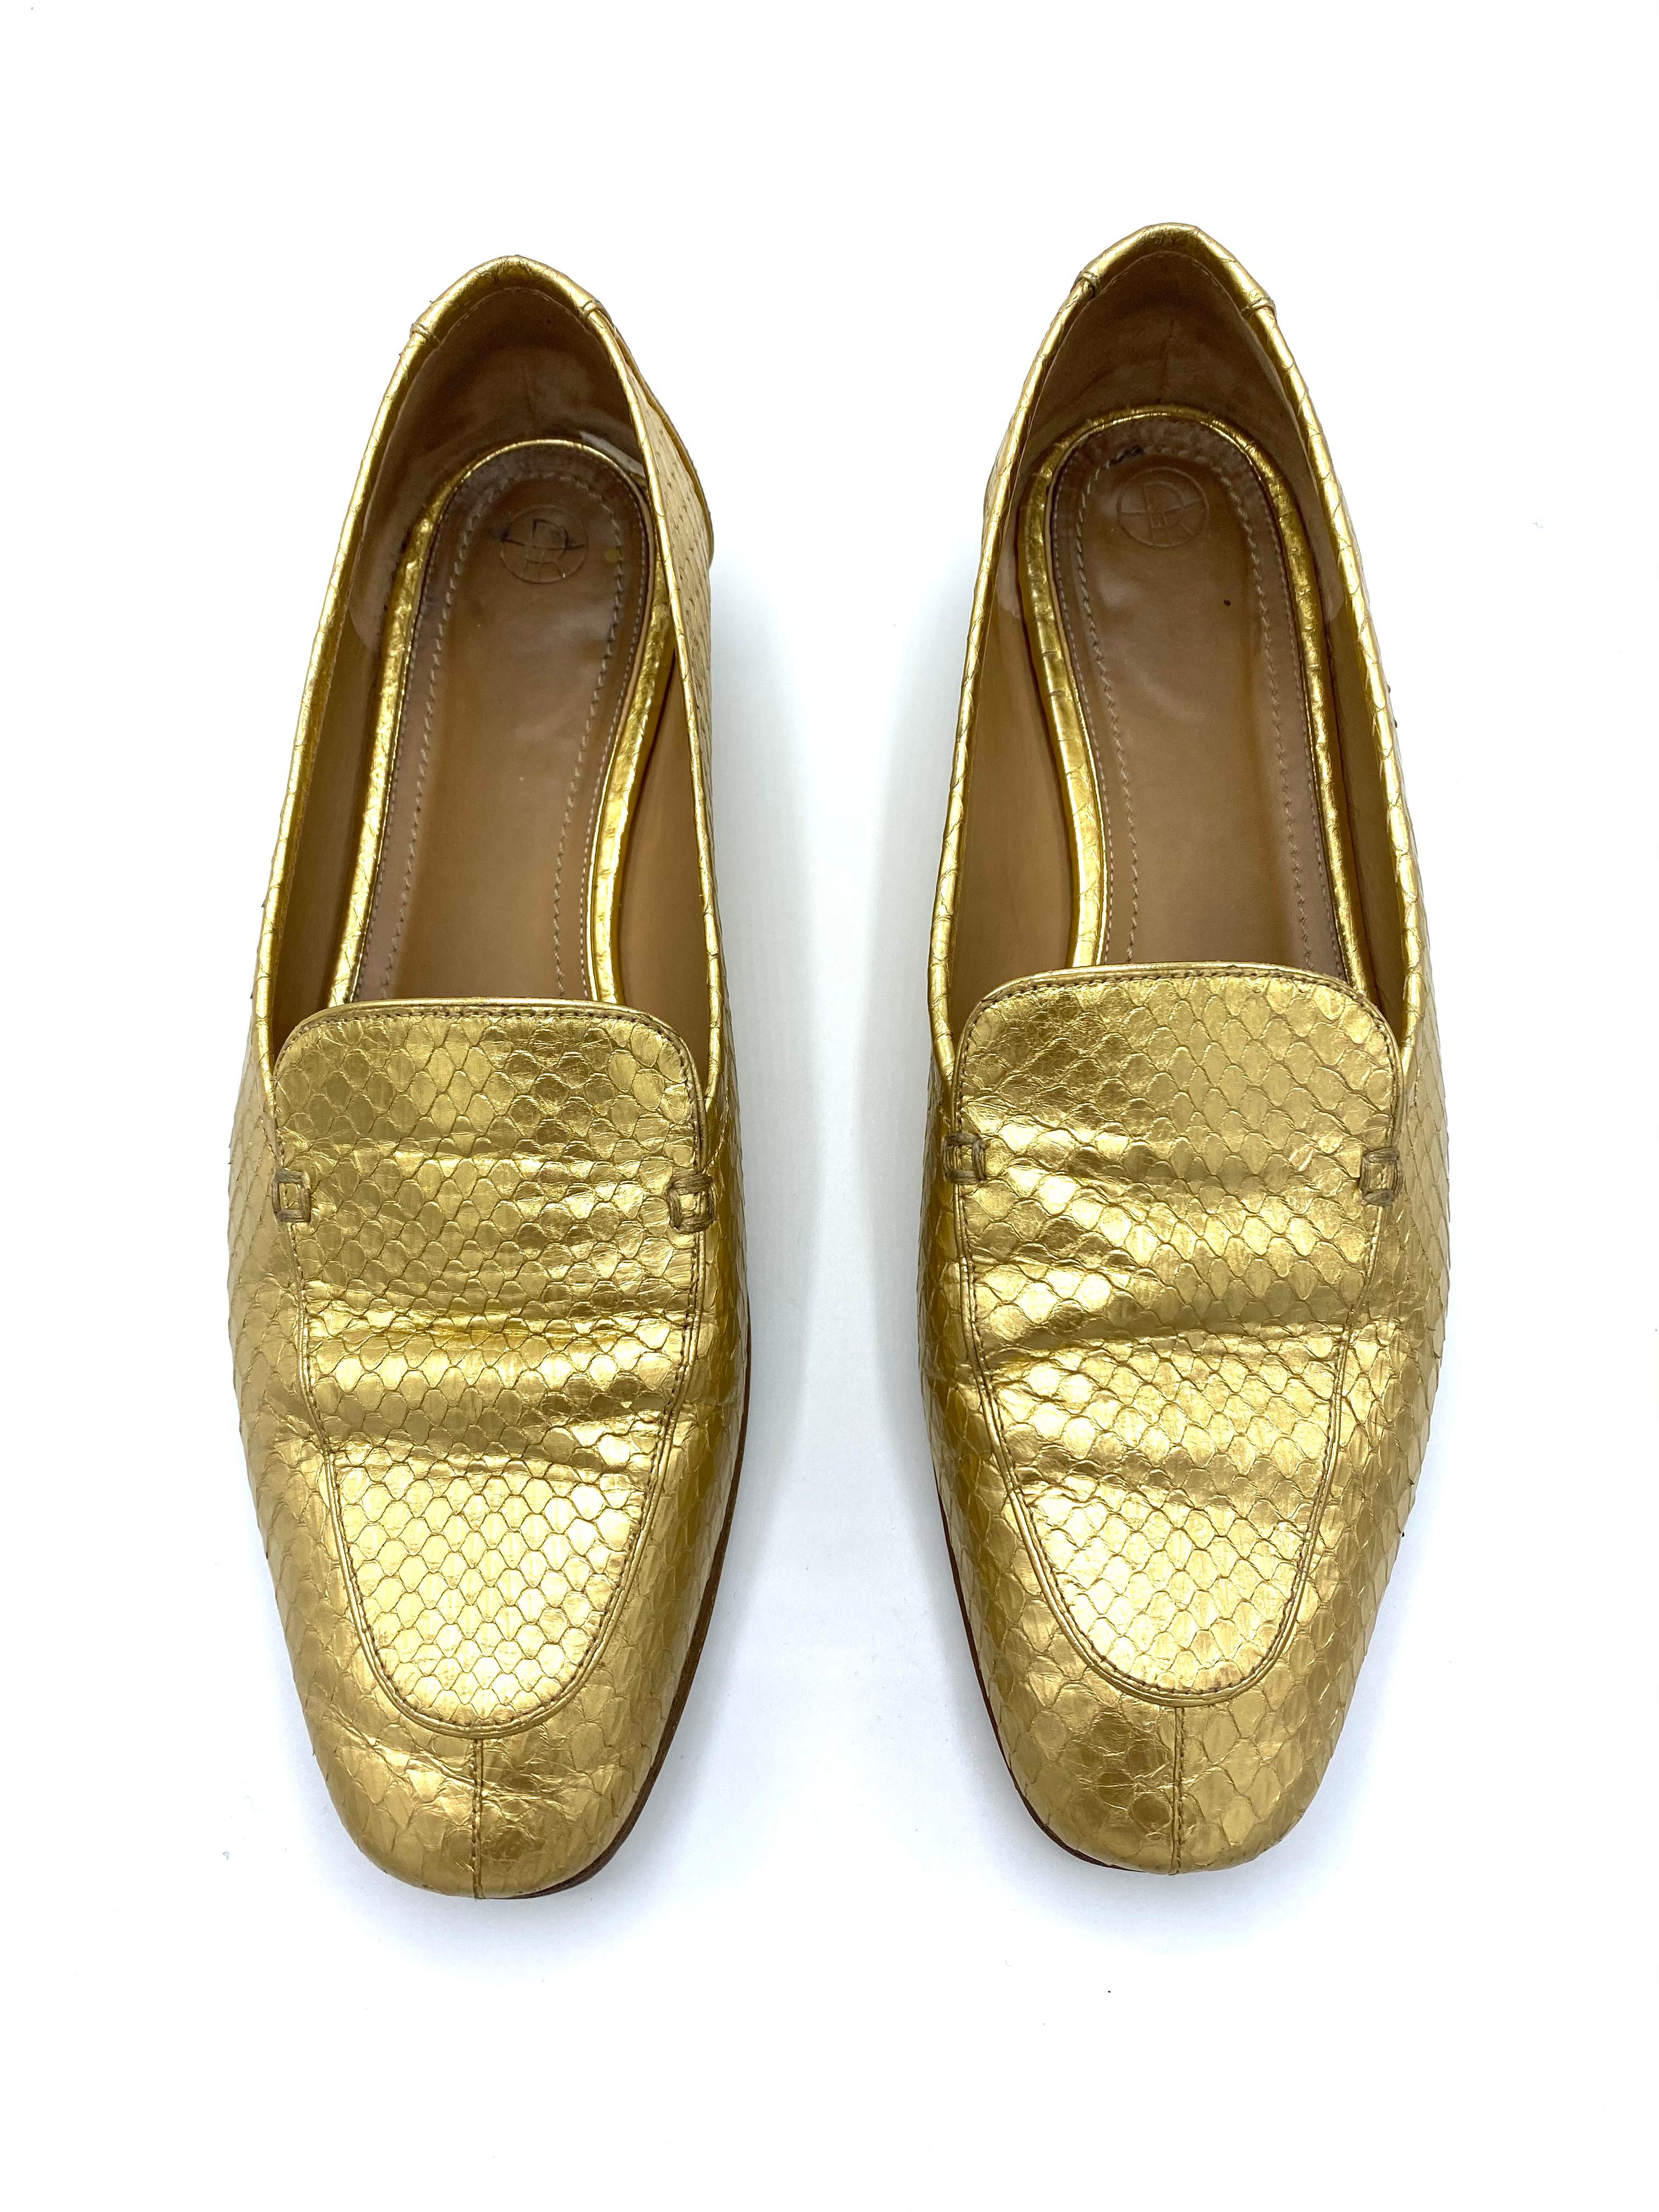 Product details:

Featuring metallic and animal skin finish, moccasin style flat shies, the heel height is 1